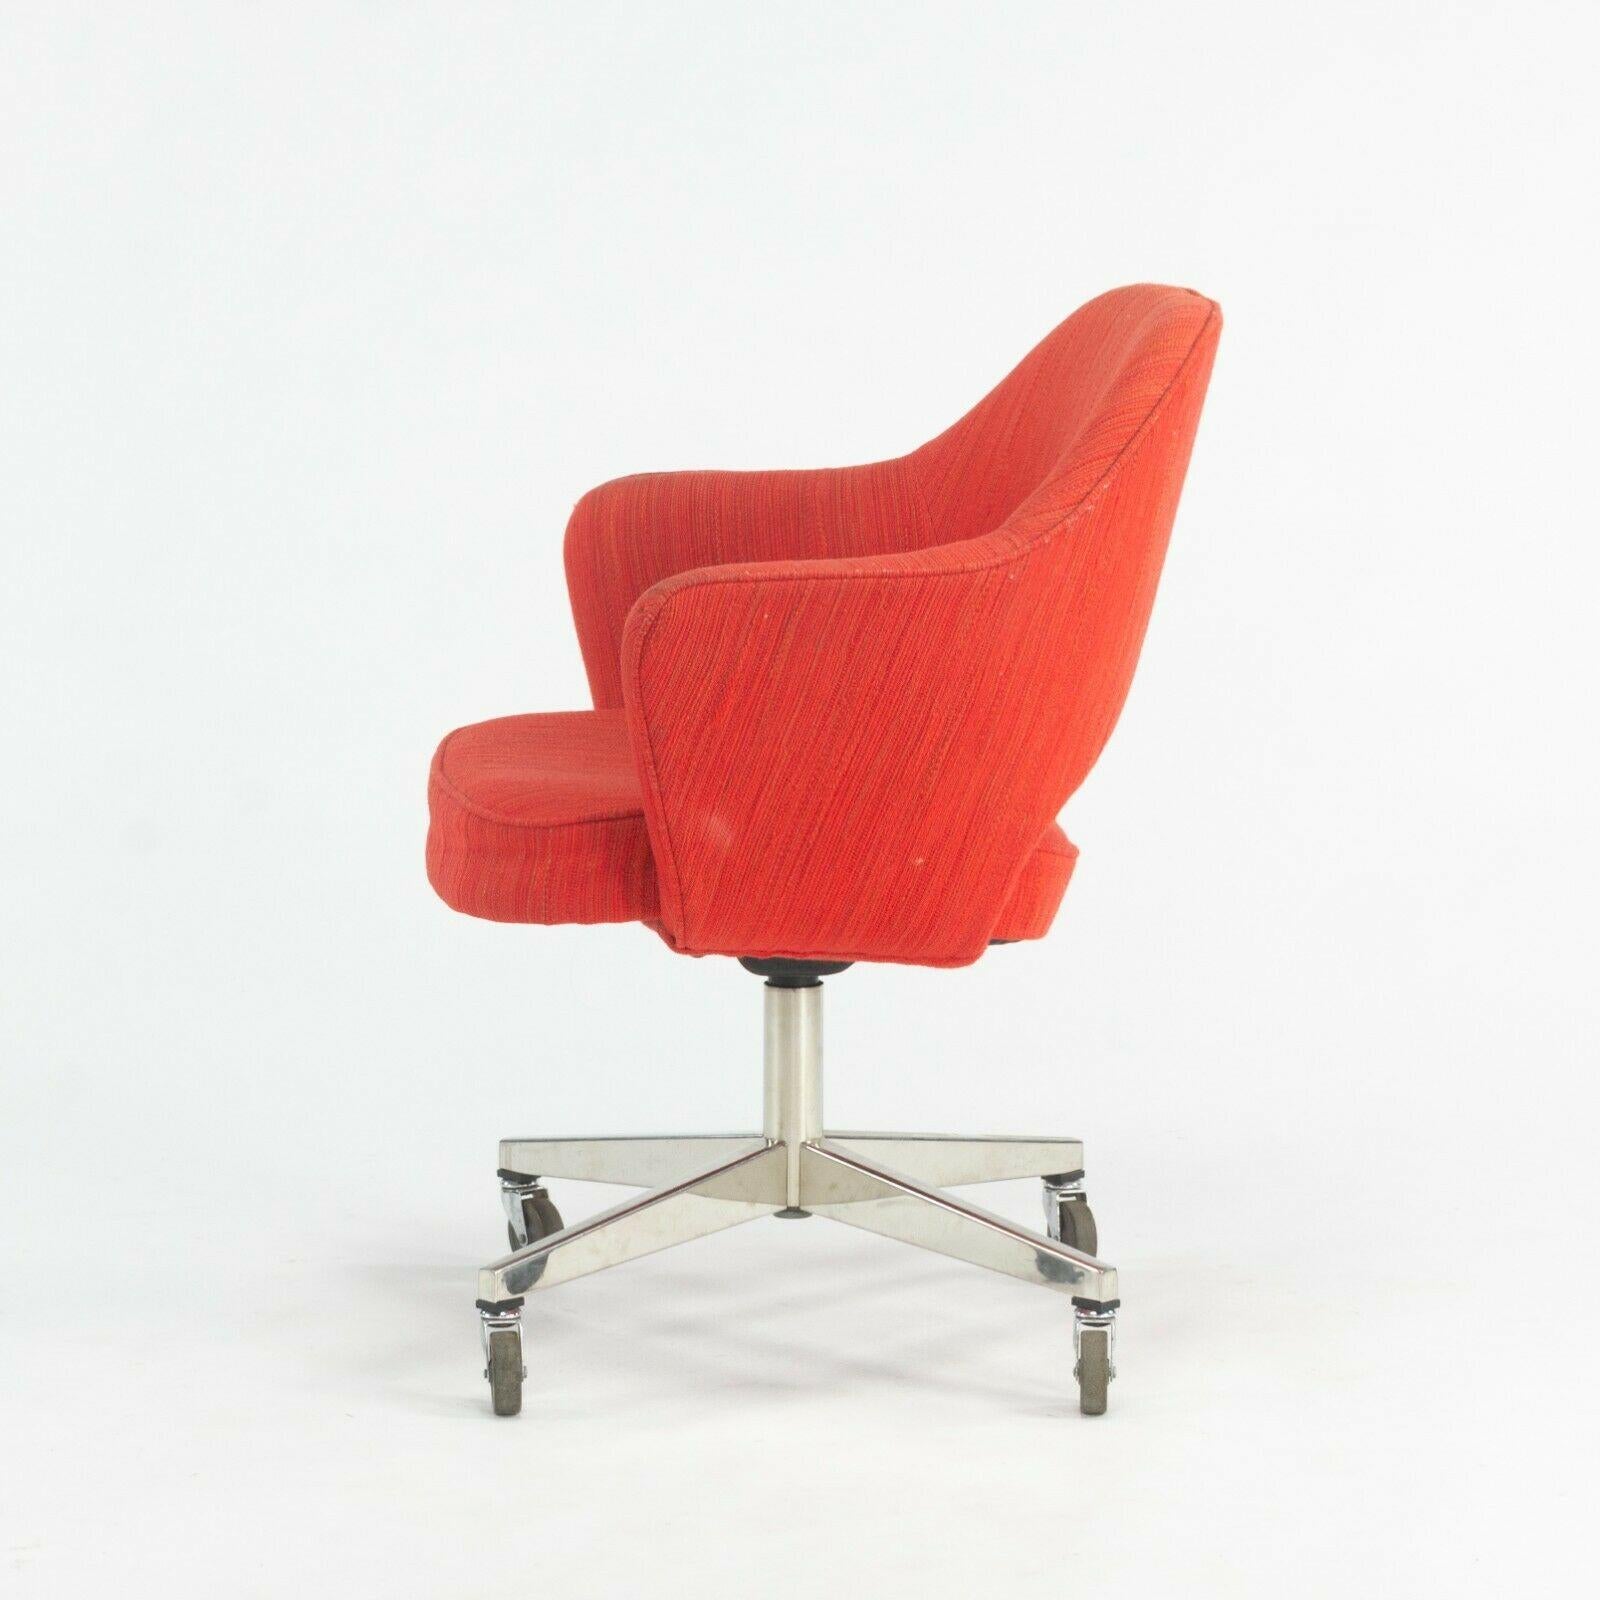 1974 Eero Saarinen for Knoll Rolling Executive Office Chairs Original Red Fabric For Sale 2